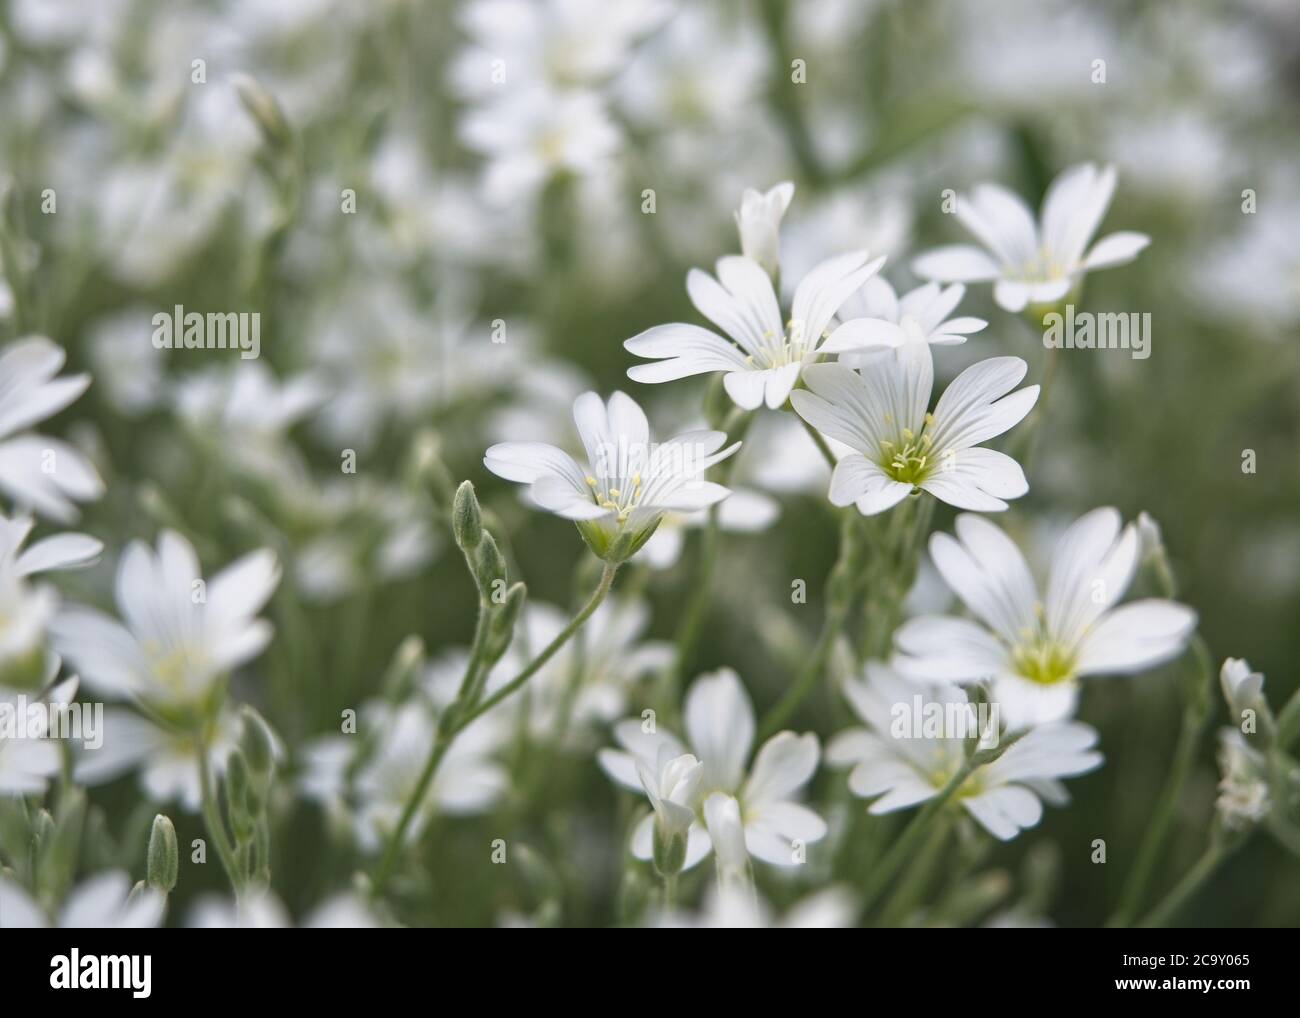 Field chickweed or mouse-ear blooming in the spring. Close-up of little white flowers growing in large groups. Cerastium arvense. Blurred background. Stock Photo